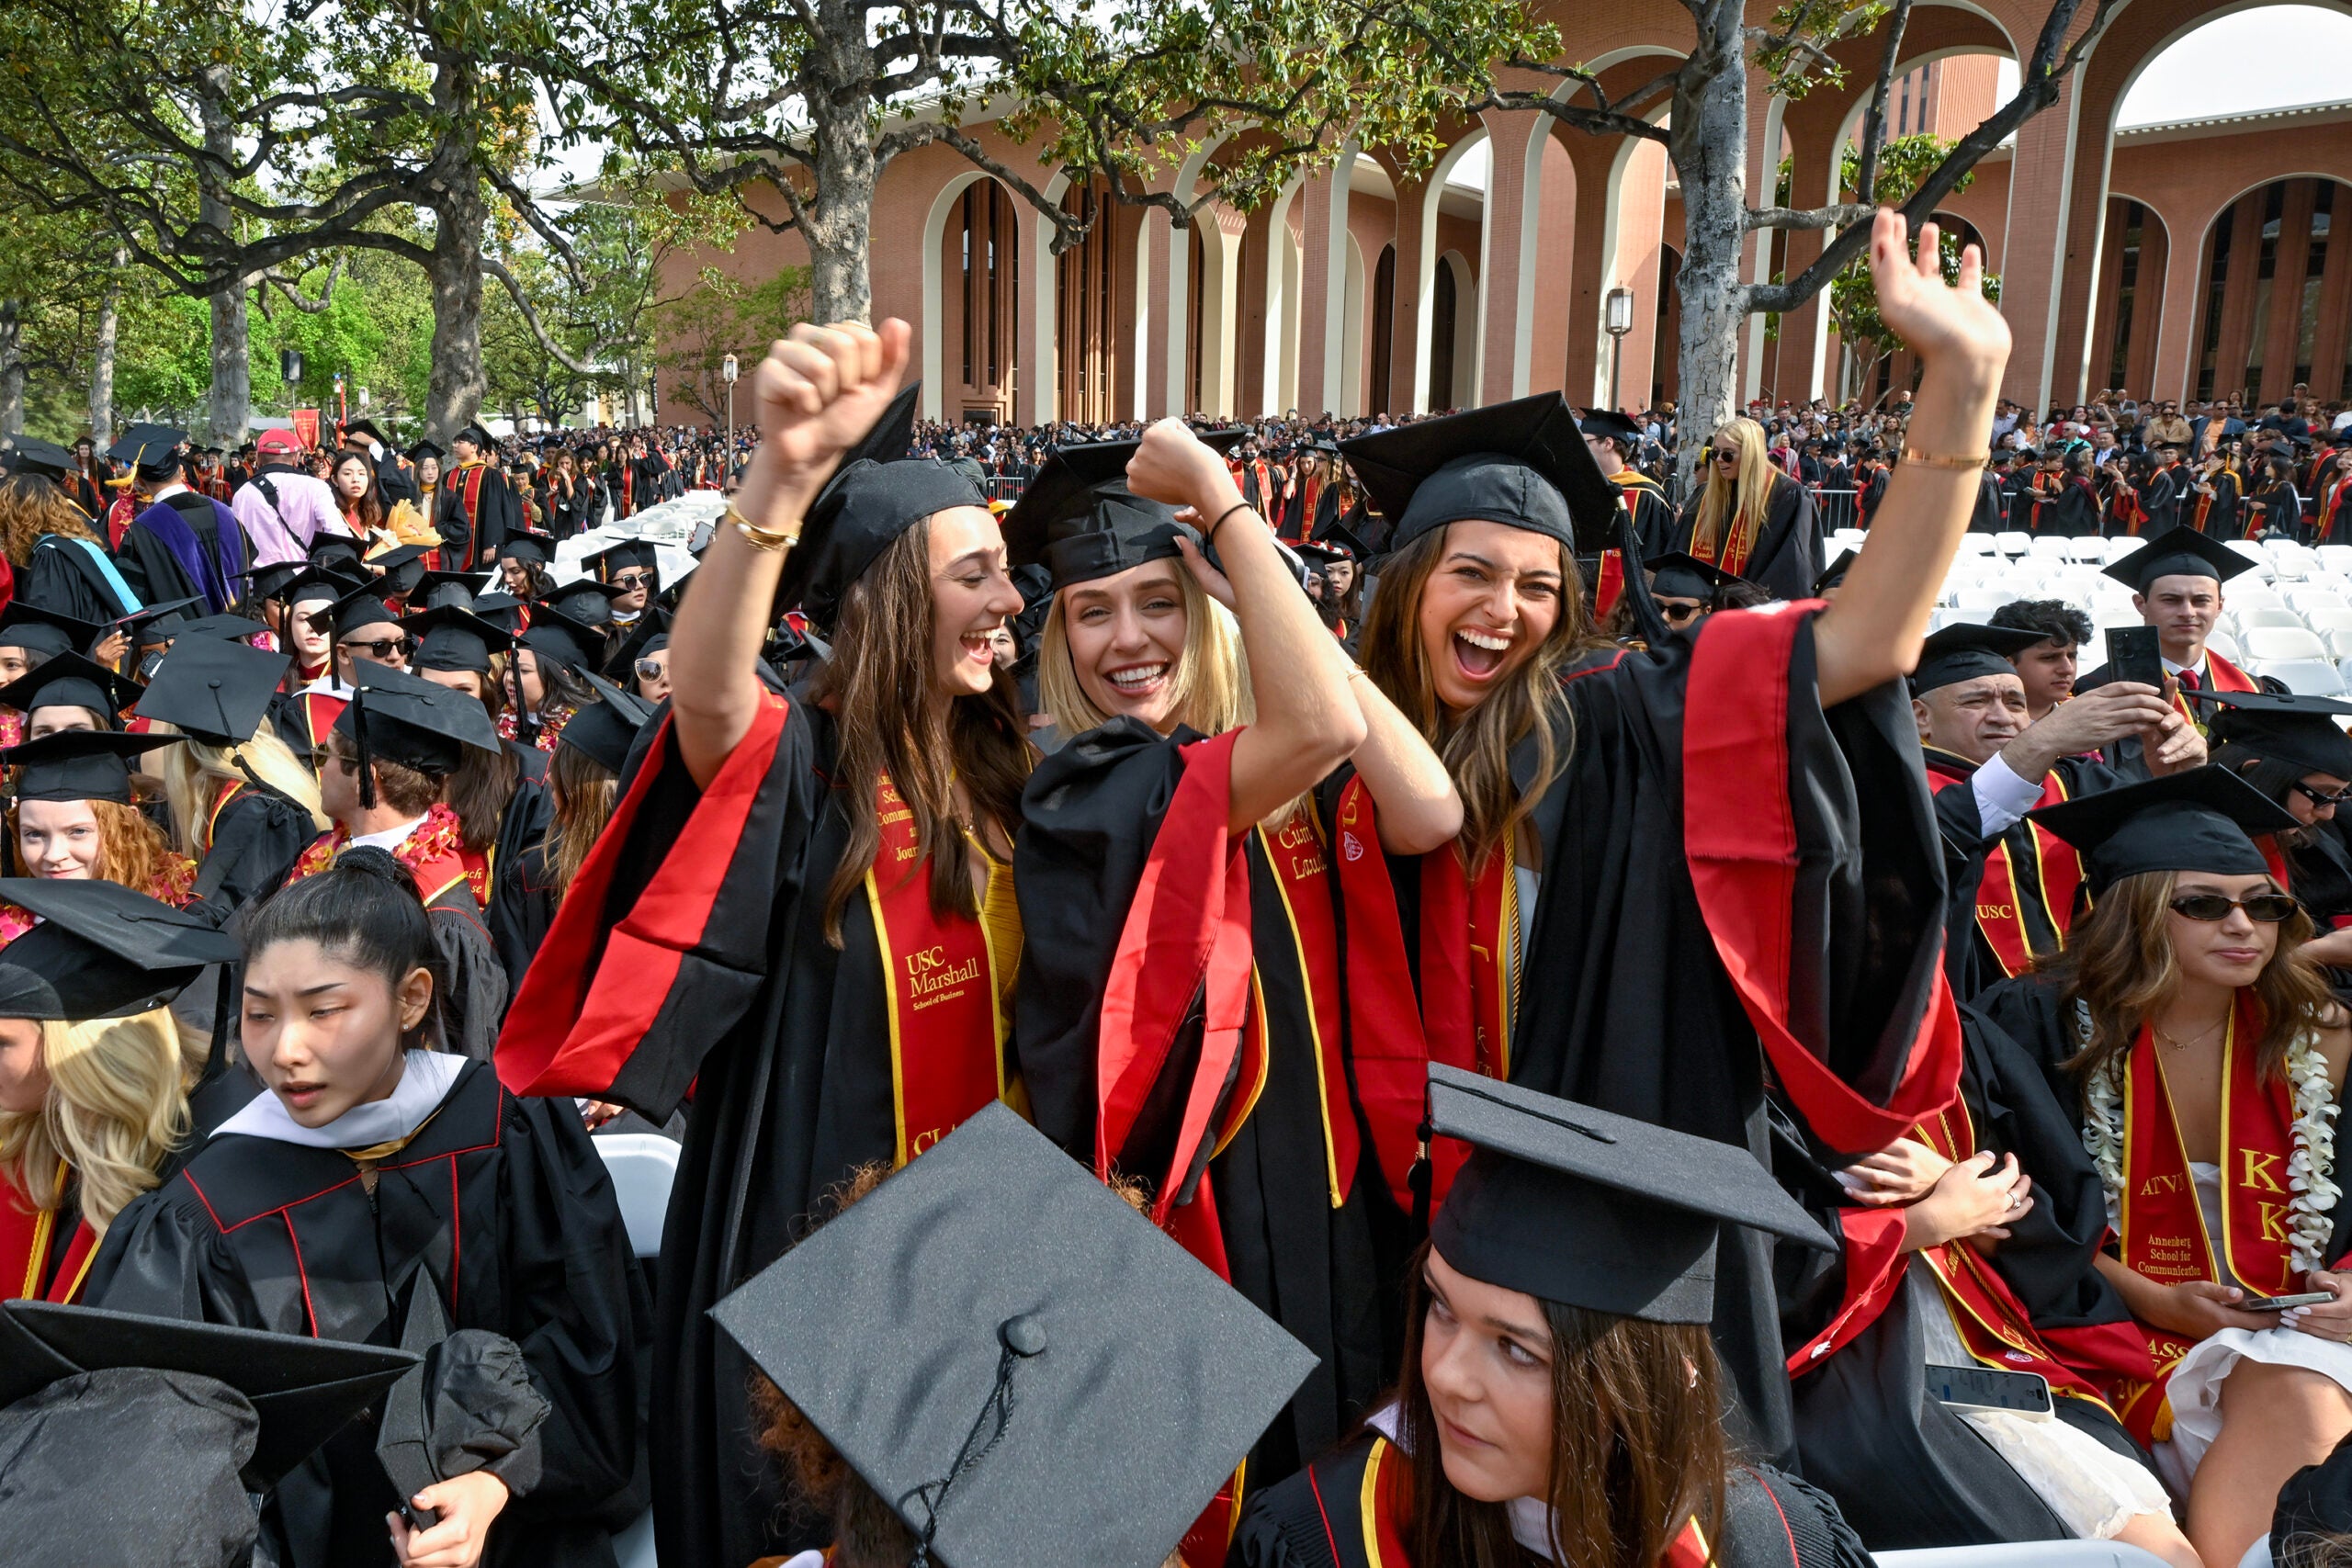 Students celebrate during the 140th commencement ceremony at the University of Southern California, May 12, 2023. (Photo/Gus Ruelas)